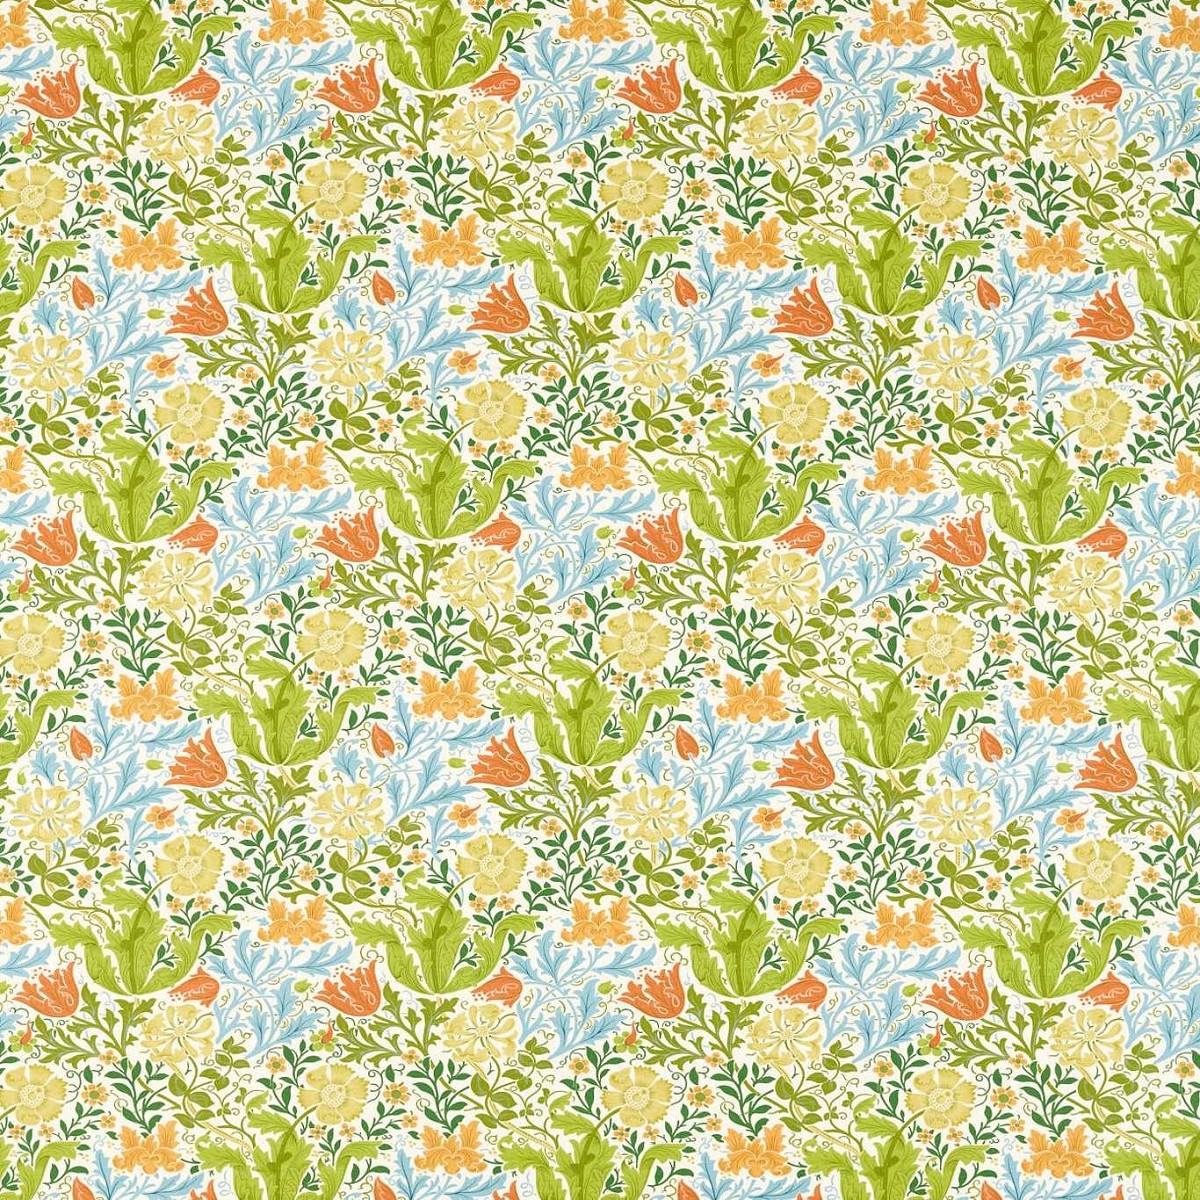 Compton Spring Fabric by William Morris & Co.